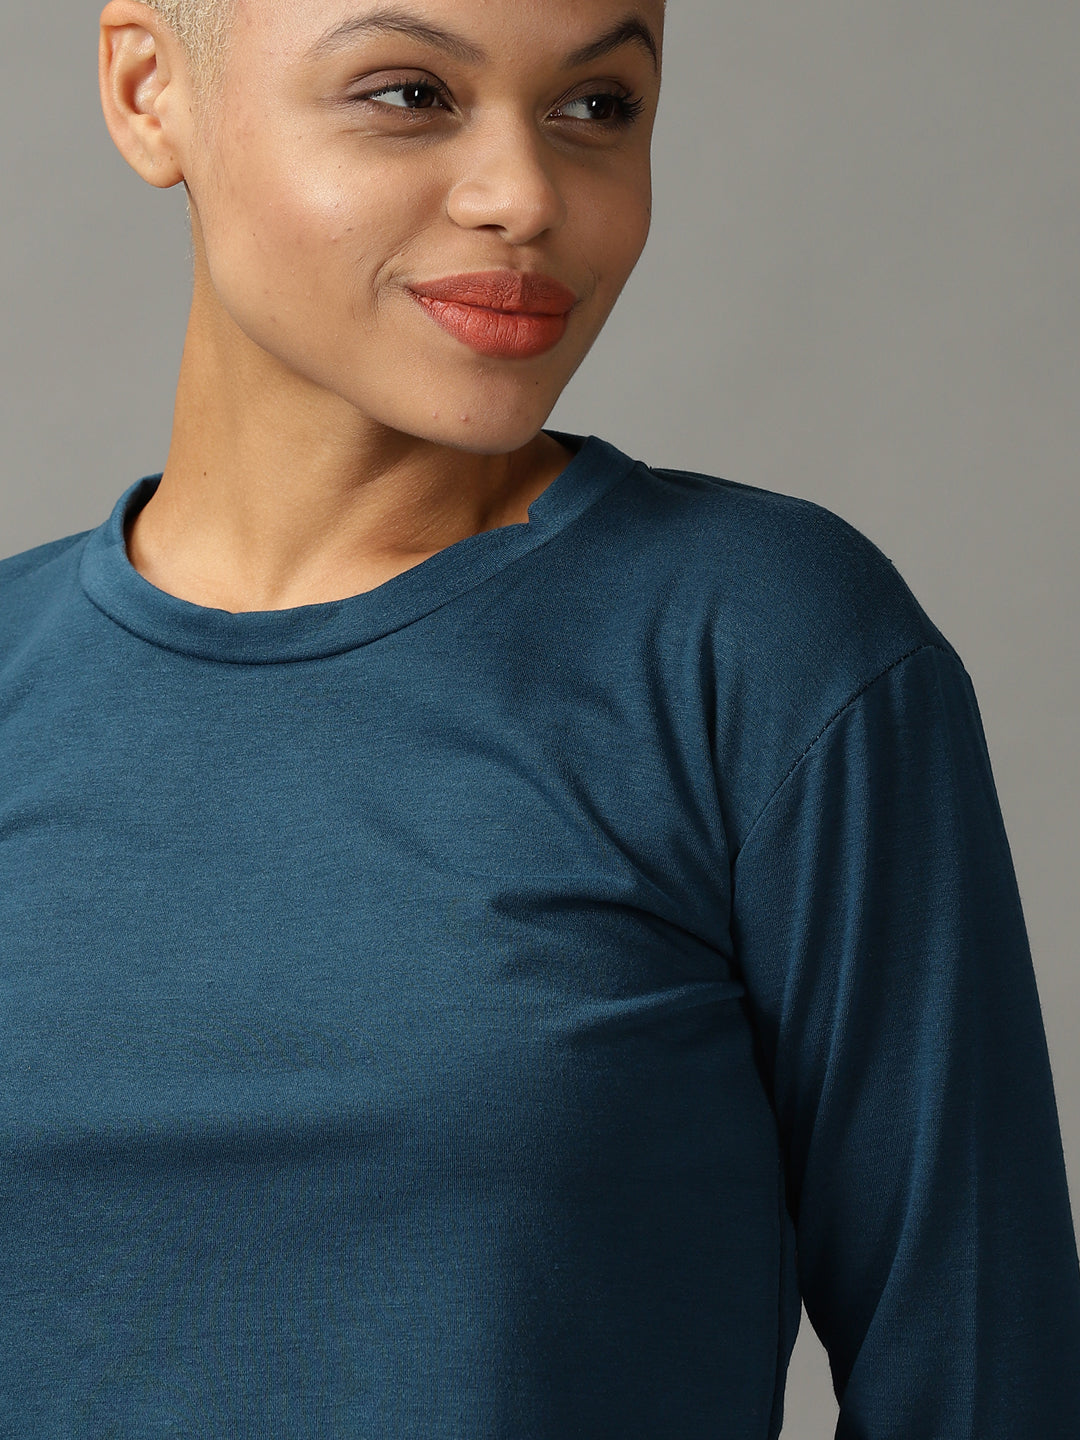 Women's Blue Solid Boxy Crop Top